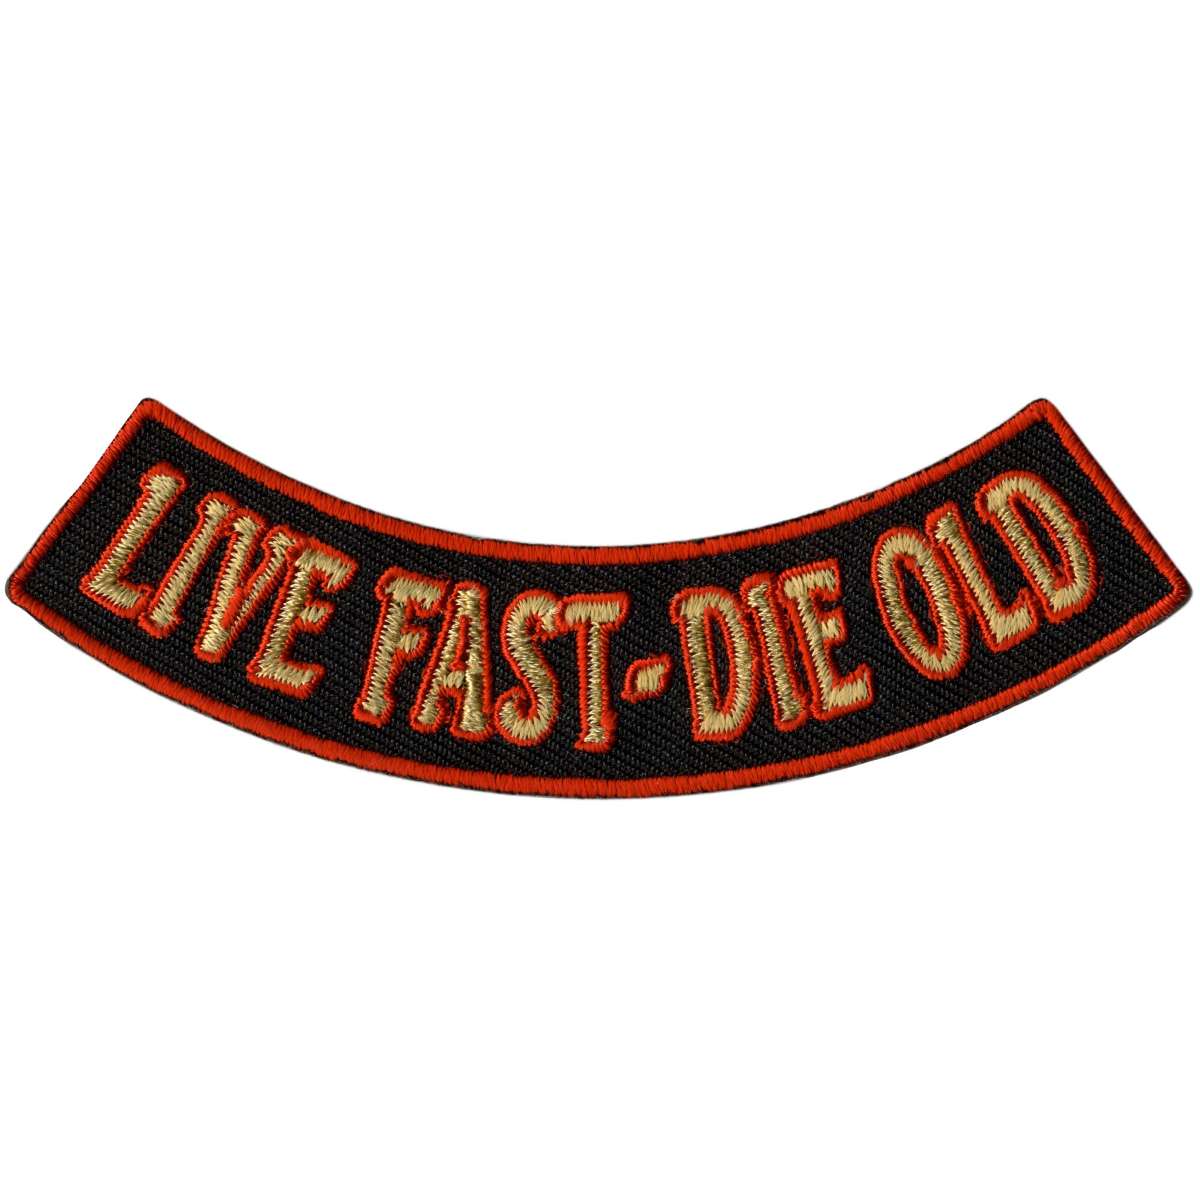 Hot Leathers Live Fast - Die Old 4” X 1” Bottom Rocker Patch PPM5198